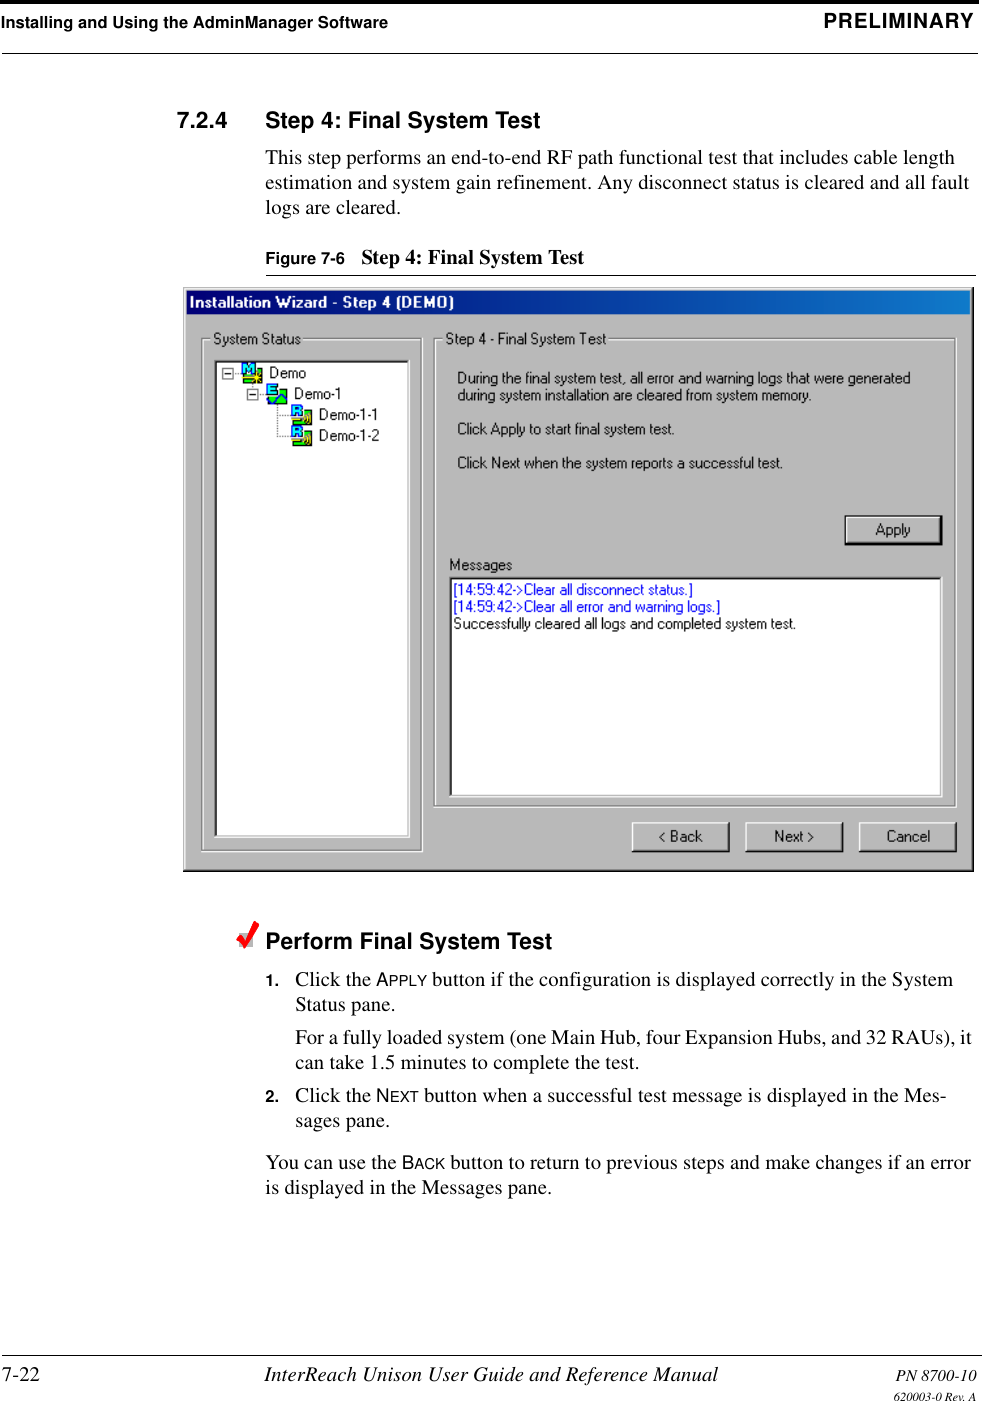 Installing and Using the AdminManager Software PRELIMINARY7-22 InterReach Unison User Guide and Reference Manual PN 8700-10620003-0 Rev. A7.2.4 Step 4: Final System TestThis step performs an end-to-end RF path functional test that includes cable length estimation and system gain refinement. Any disconnect status is cleared and all fault logs are cleared.Figure 7-6 Step 4: Final System TestPerform Final System Test1. Click the APPLY button if the configuration is displayed correctly in the System Status pane.For a fully loaded system (one Main Hub, four Expansion Hubs, and 32 RAUs), it can take 1.5 minutes to complete the test.2. Click the NEXT button when a successful test message is displayed in the Mes-sages pane.You can use the BACK button to return to previous steps and make changes if an error is displayed in the Messages pane.